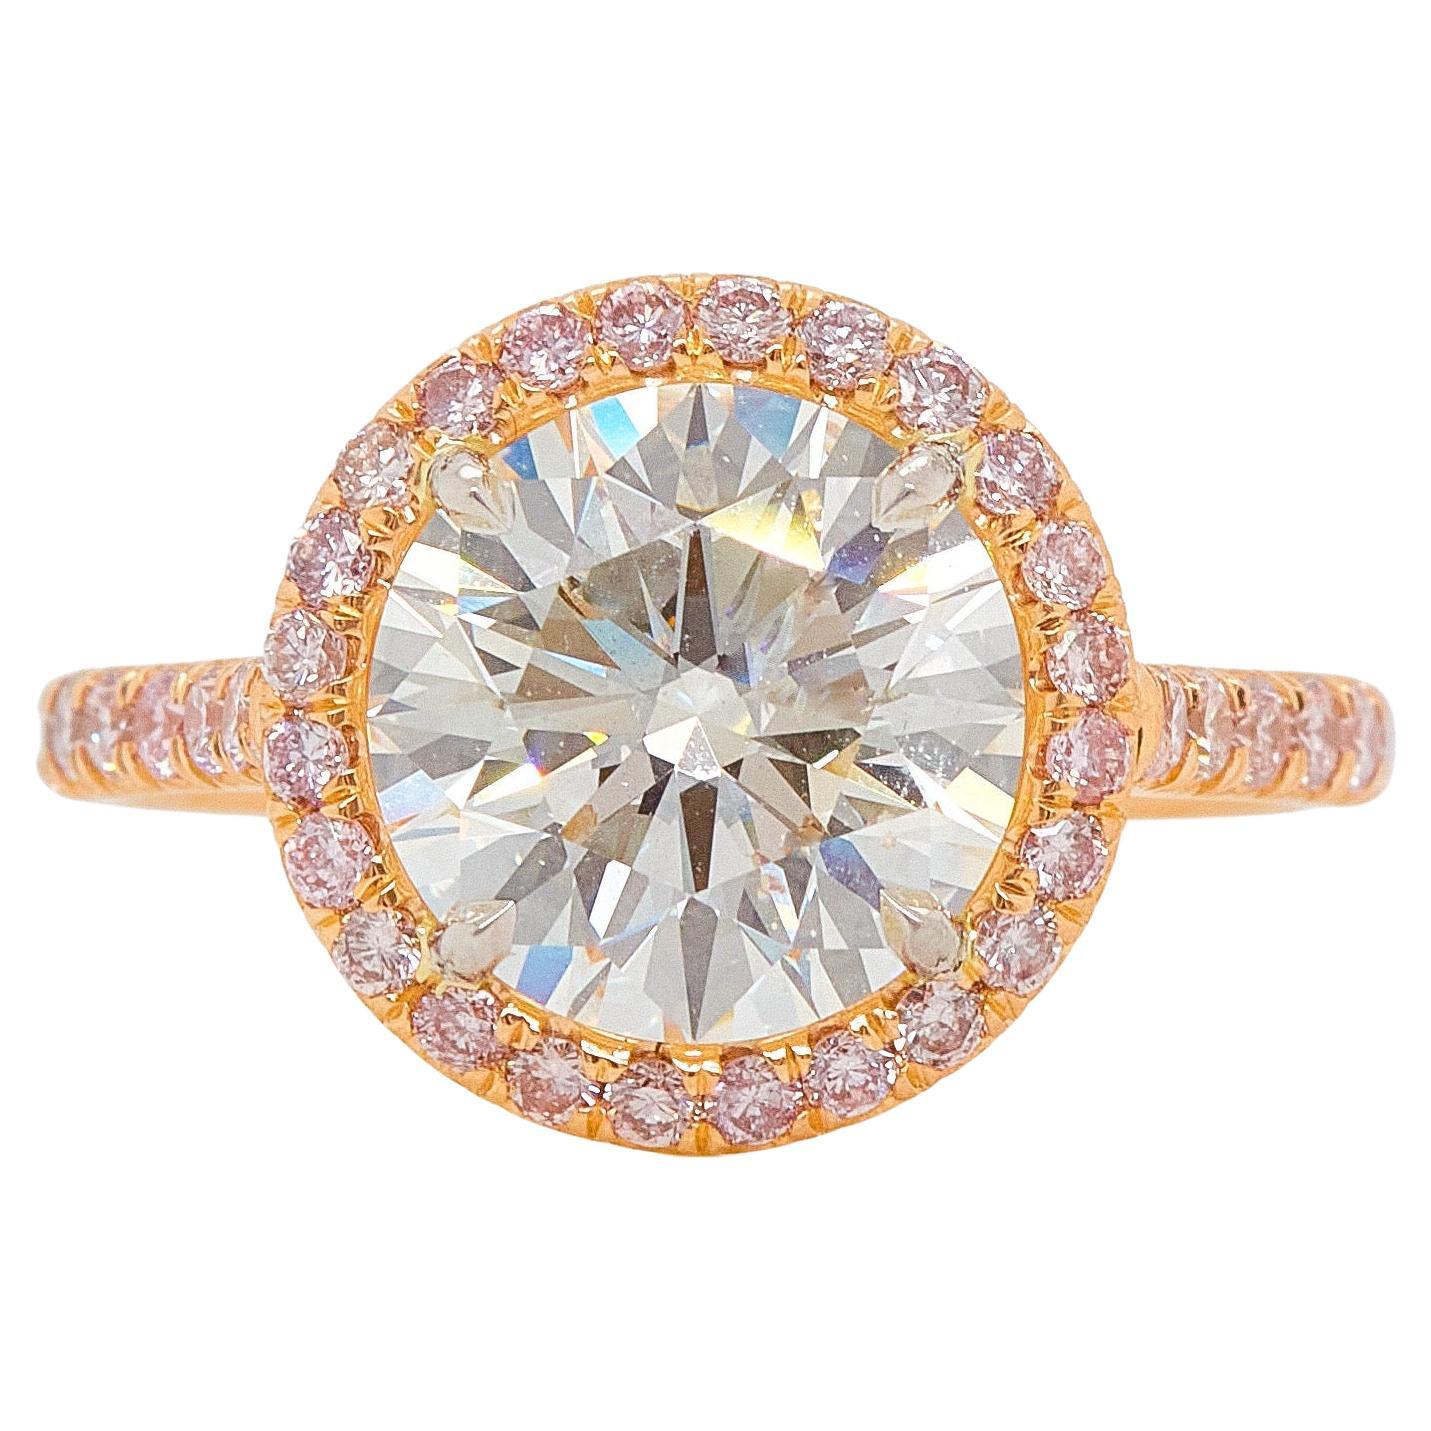 3.5 Carat Round Cut Diamond, Engagement Ring 18k Rose Gold, GIA Certified For Sale